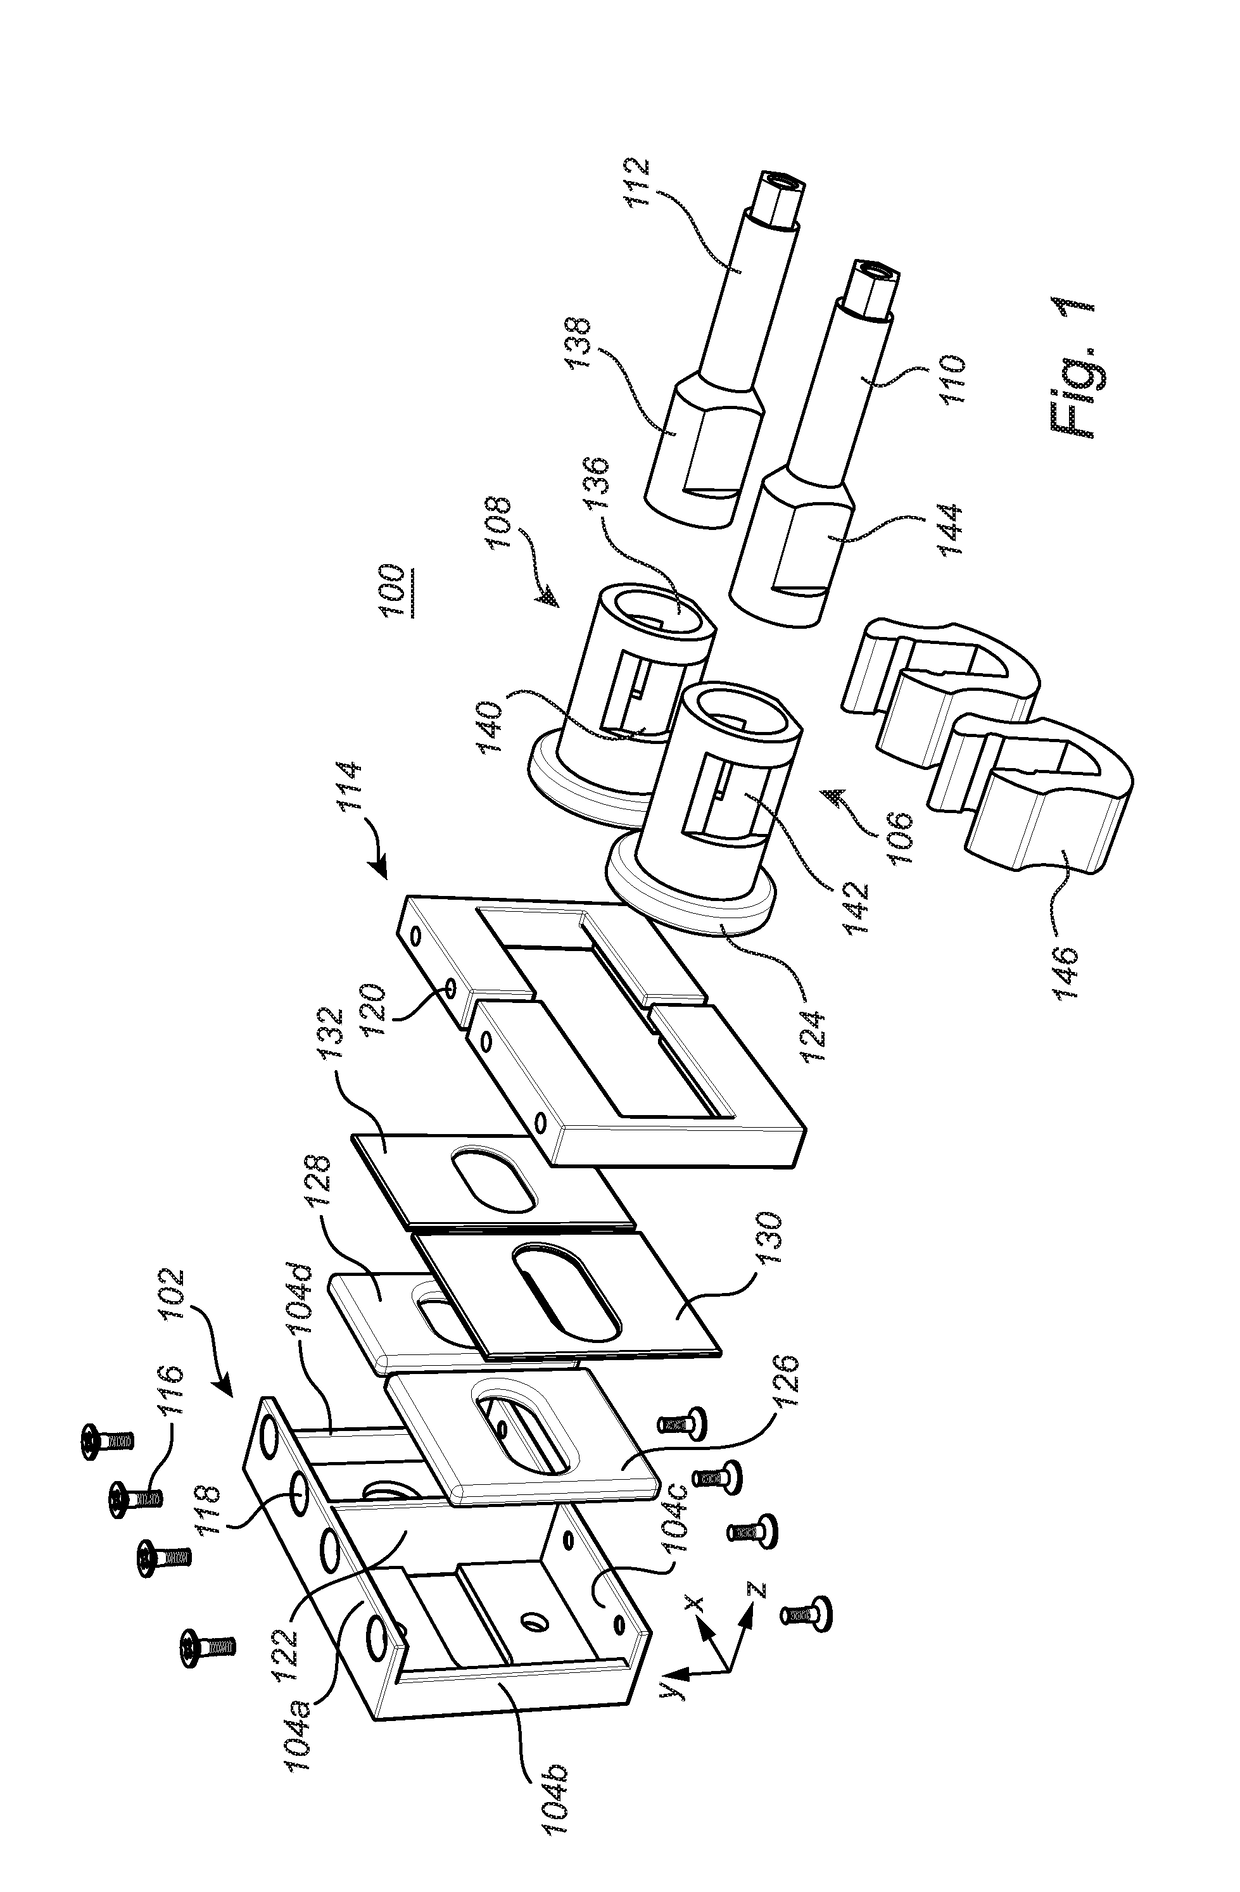 Attachment device allowing natural wrist rotation for osseointegrated prostheses